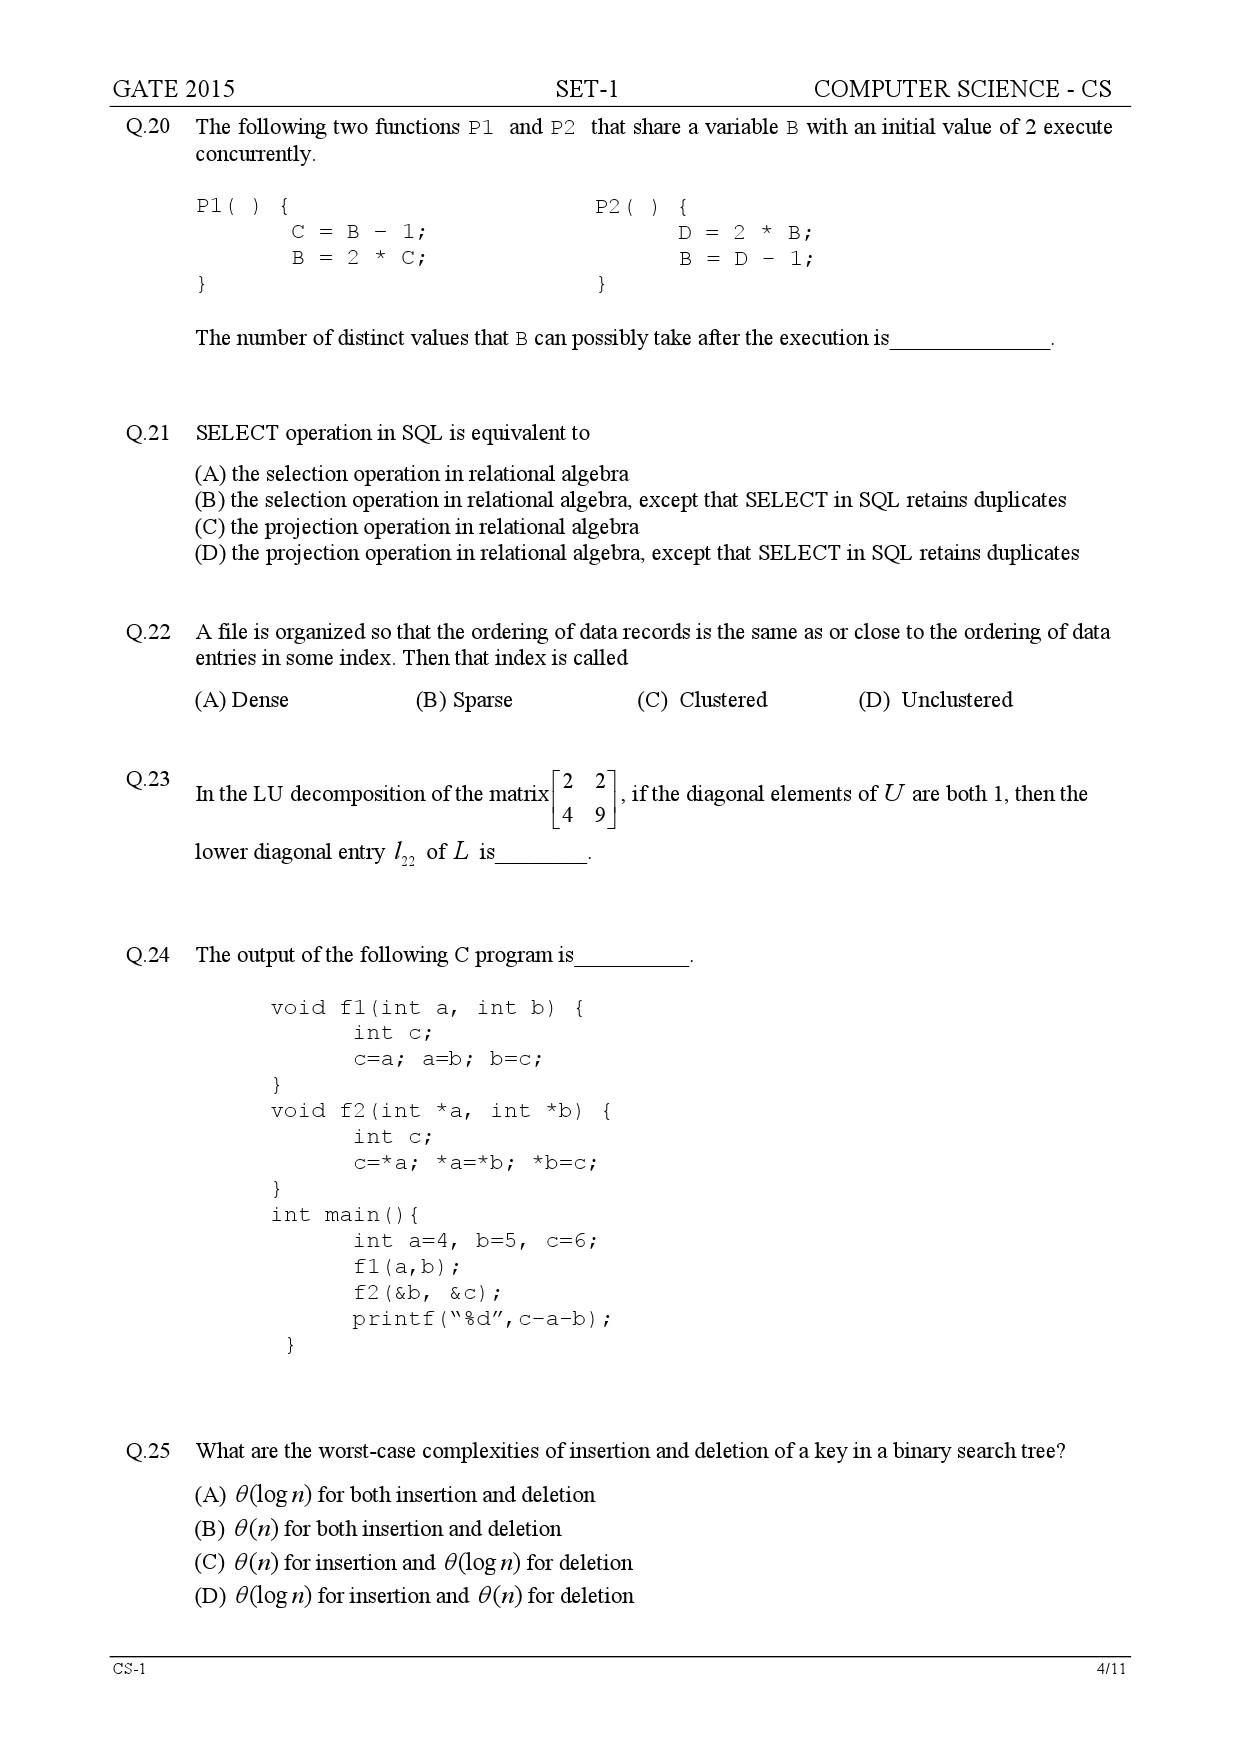 GATE Exam Question Paper 2015 Computer Science and Information Technology Set 1 4